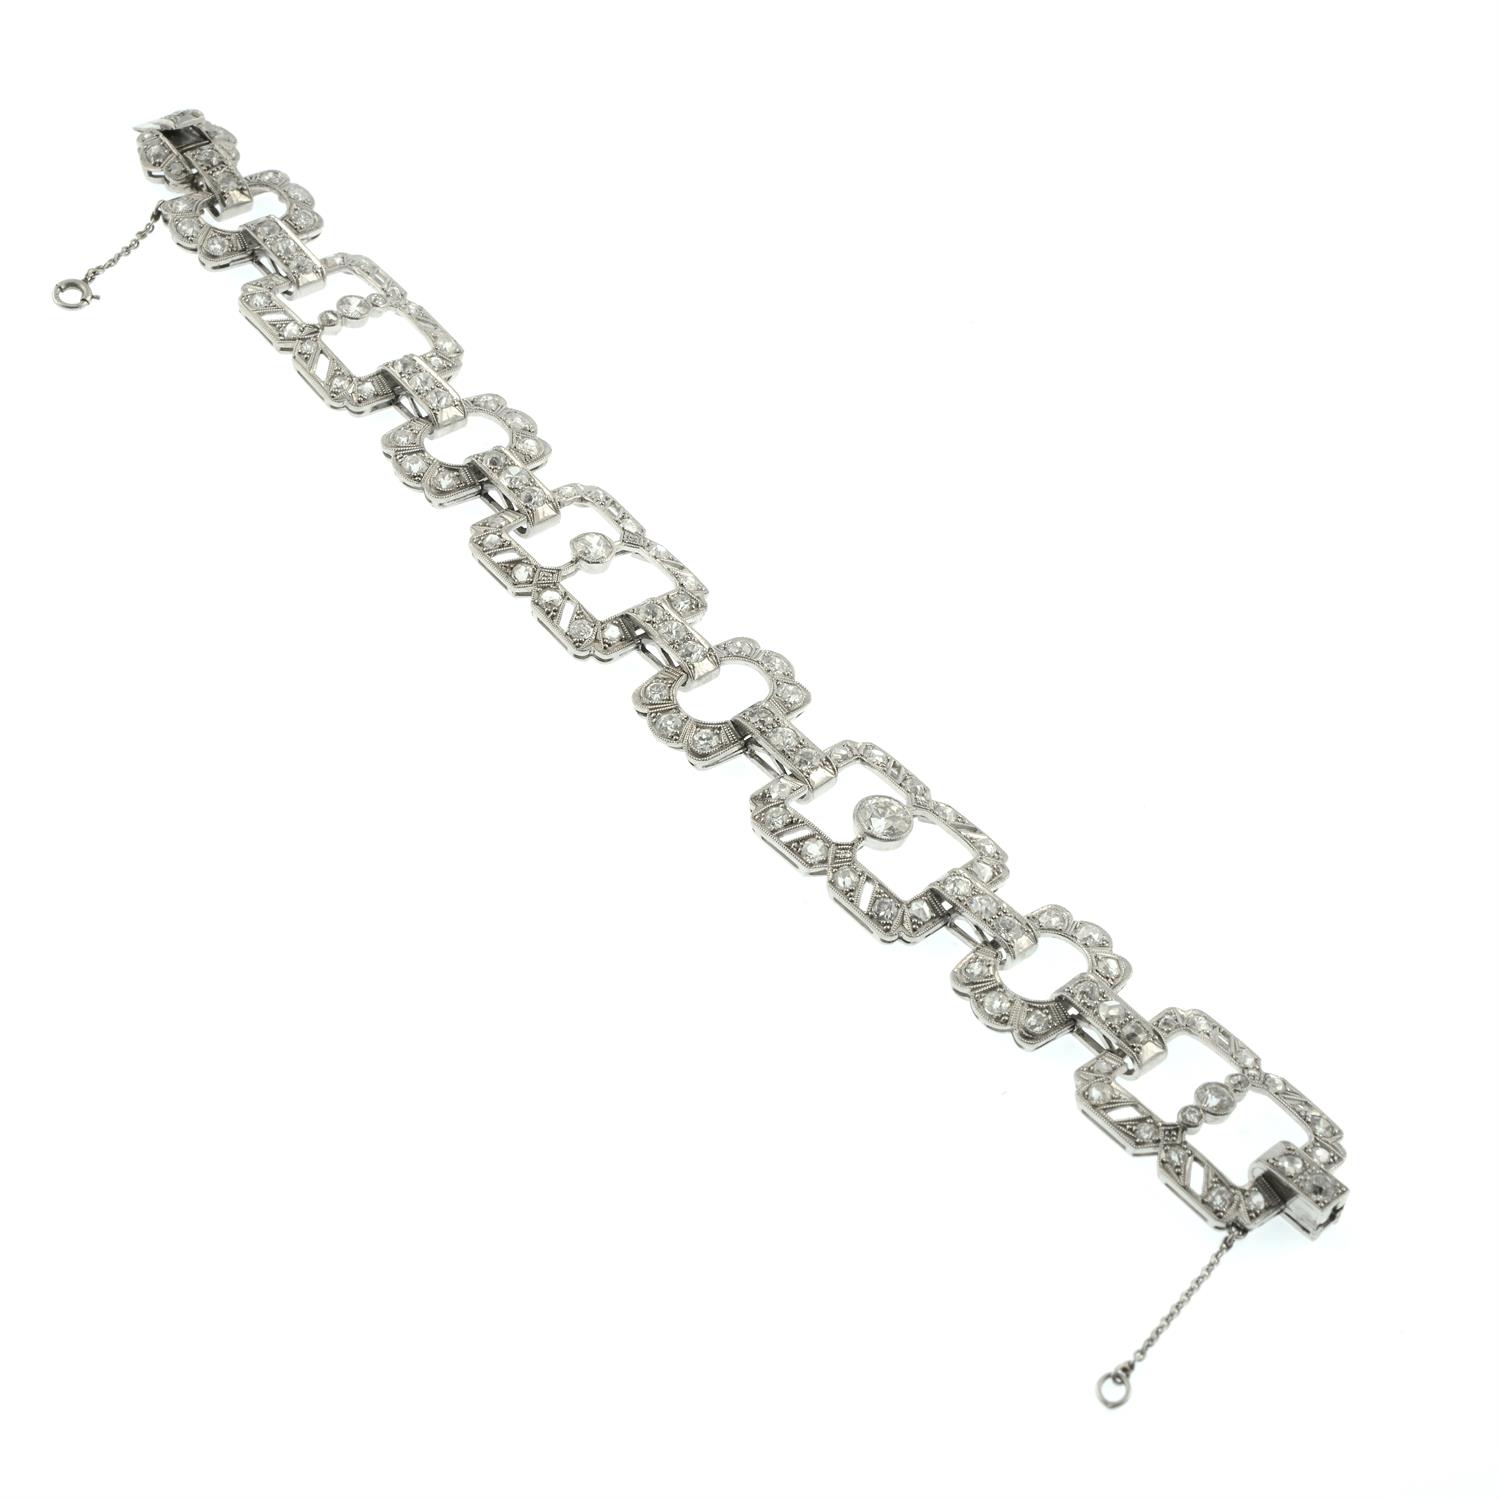 An Art Deco old and rose-cut diamond bracelet. - Image 3 of 4